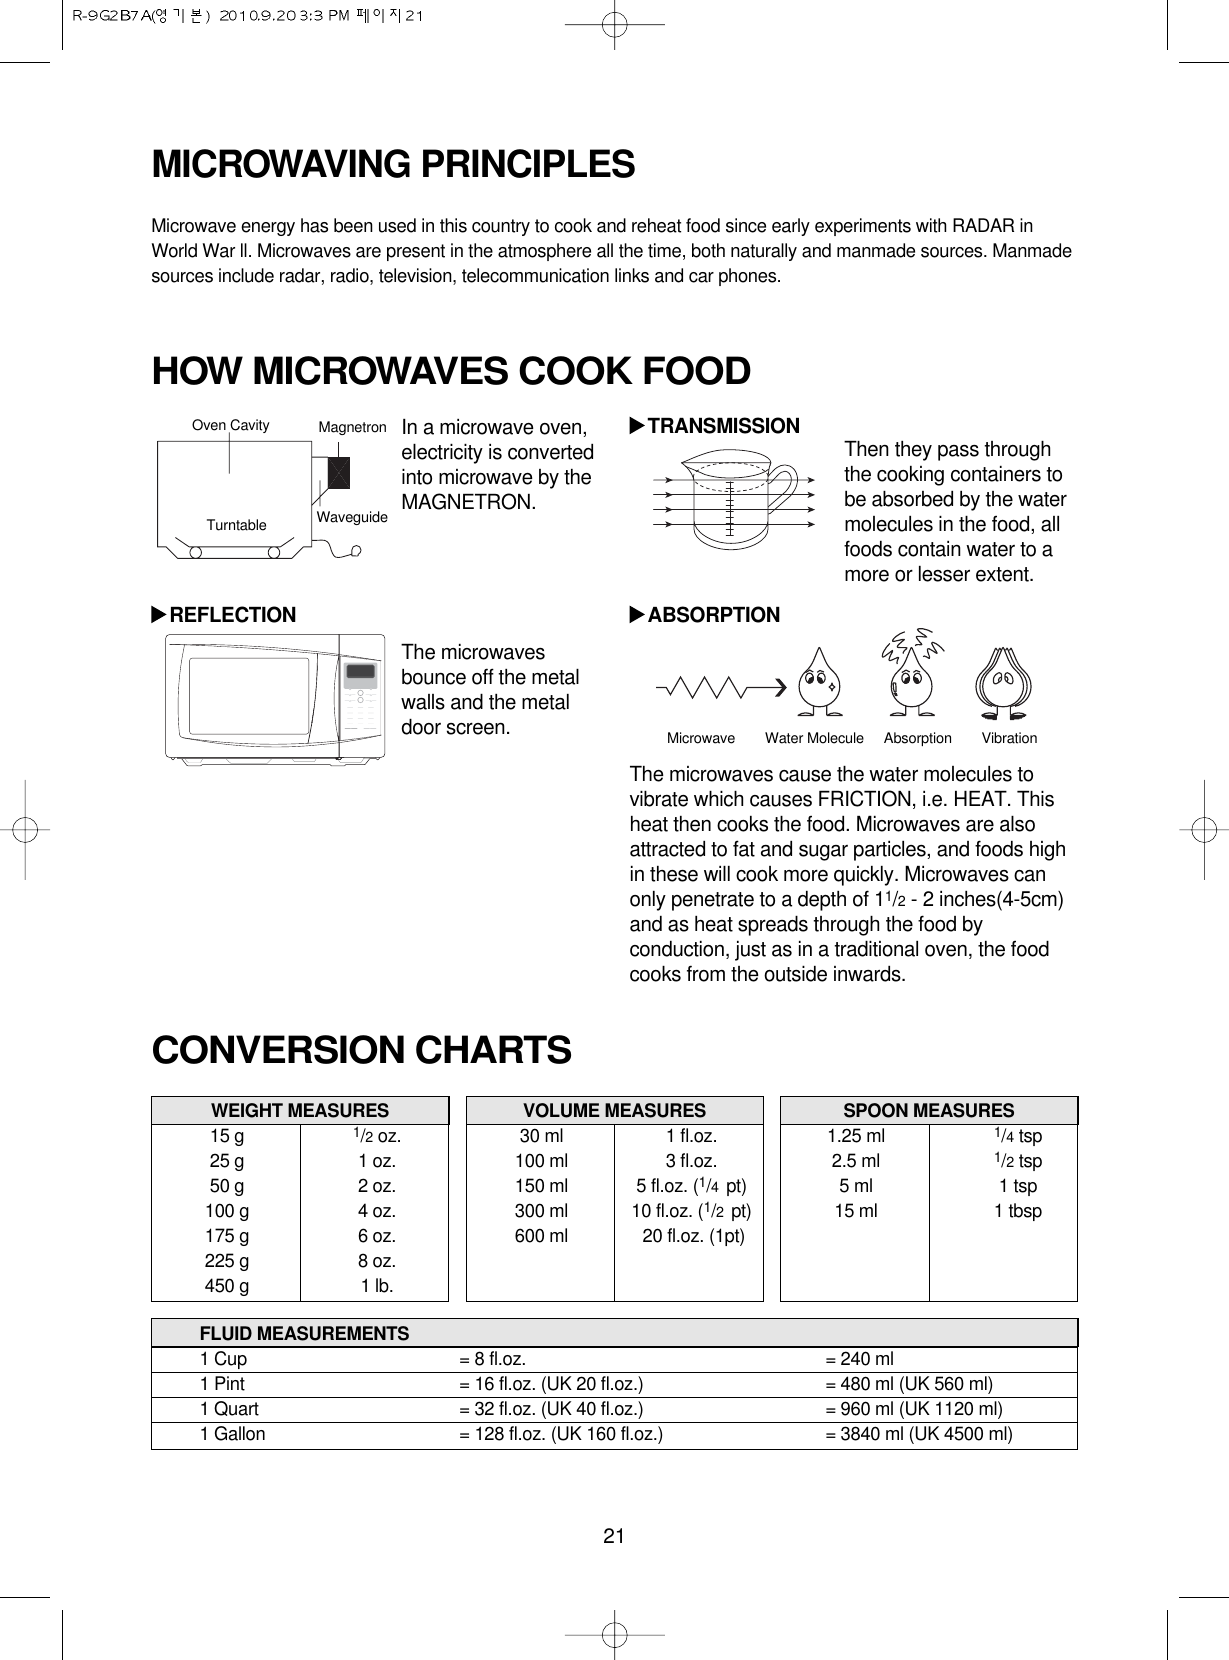 21MICROWAVING PRINCIPLESMicrowave energy has been used in this country to cook and reheat food since early experiments with RADAR inWorld War ll. Microwaves are present in the atmosphere all the time, both naturally and manmade sources. Manmadesources include radar, radio, television, telecommunication links and car phones.CONVERSION CHARTSHOW MICROWAVES COOK FOODThen they pass throughthe cooking containers tobe absorbed by the watermolecules in the food, allfoods contain water to amore or lesser extent.The microwaves cause the water molecules tovibrate which causes FRICTION, i.e. HEAT. Thisheat then cooks the food. Microwaves are alsoattracted to fat and sugar particles, and foods highin these will cook more quickly. Microwaves canonly penetrate to a depth of 11/2- 2 inches(4-5cm)and as heat spreads through the food byconduction, just as in a traditional oven, the foodcooks from the outside inwards.In a microwave oven,electricity is convertedinto microwave by theMAGNETRON.The microwavesbounce off the metalwalls and the metaldoor screen.Oven Cavity MagnetronWaveguideTurntableREFLECTIONTRANSMISSIONABSORPTIONMicrowave Water Molecule Absorption VibrationWEIGHT MEASURES15 g 1/2oz.25 g 1 oz.50 g 2 oz.100 g 4 oz.175 g 6 oz.225 g 8 oz.450 g 1 lb.VOLUME MEASURES30 ml 1 fl.oz.100 ml 3 fl.oz.150 ml 5 fl.oz. (1/4  pt)300 ml 10 fl.oz. (1/2  pt)600 ml 20 fl.oz. (1pt)SPOON MEASURES1.25 ml 1/4tsp2.5 ml 1/2tsp5 ml 1 tsp15 ml 1 tbspFLUID MEASUREMENTS1 Cup = 8 fl.oz. = 240 ml1 Pint = 16 fl.oz. (UK 20 fl.oz.) = 480 ml (UK 560 ml)1 Quart = 32 fl.oz. (UK 40 fl.oz.) = 960 ml (UK 1120 ml)1 Gallon = 128 fl.oz. (UK 160 fl.oz.) = 3840 ml (UK 4500 ml)